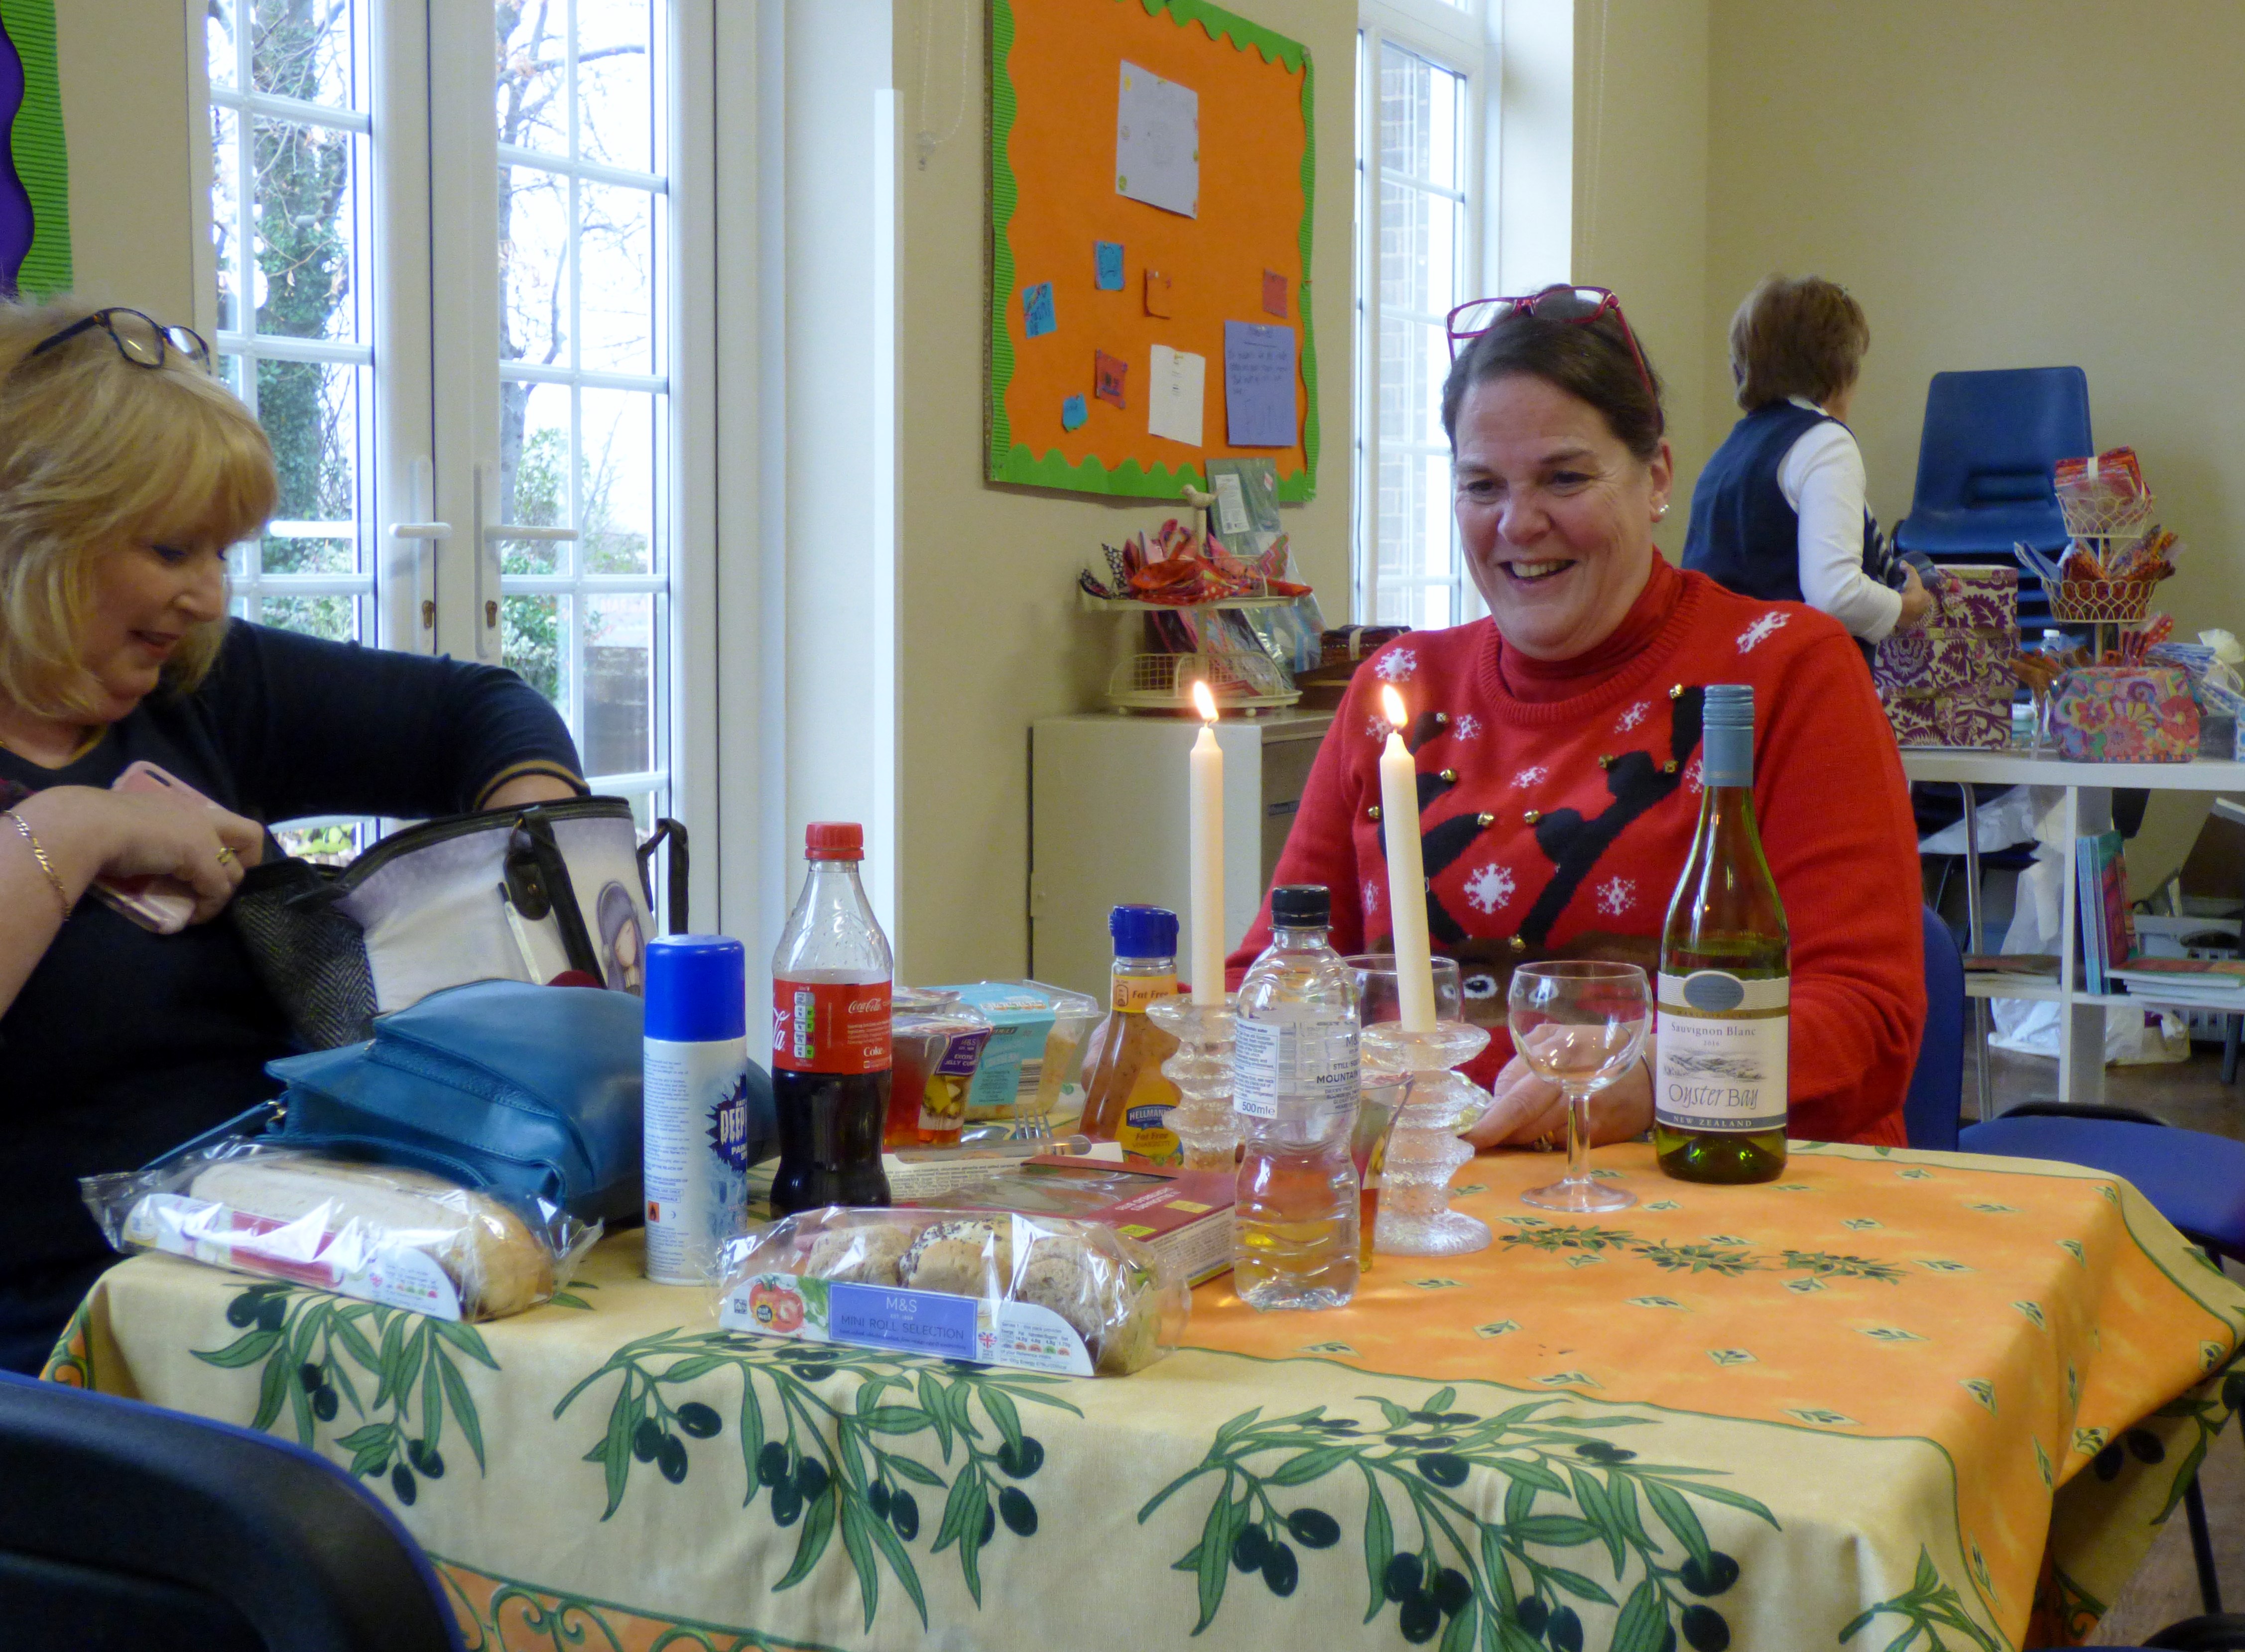 this is how the West Kirby girls lunch at Kaffe Fassett workshop, All Hallows, Dec 2016